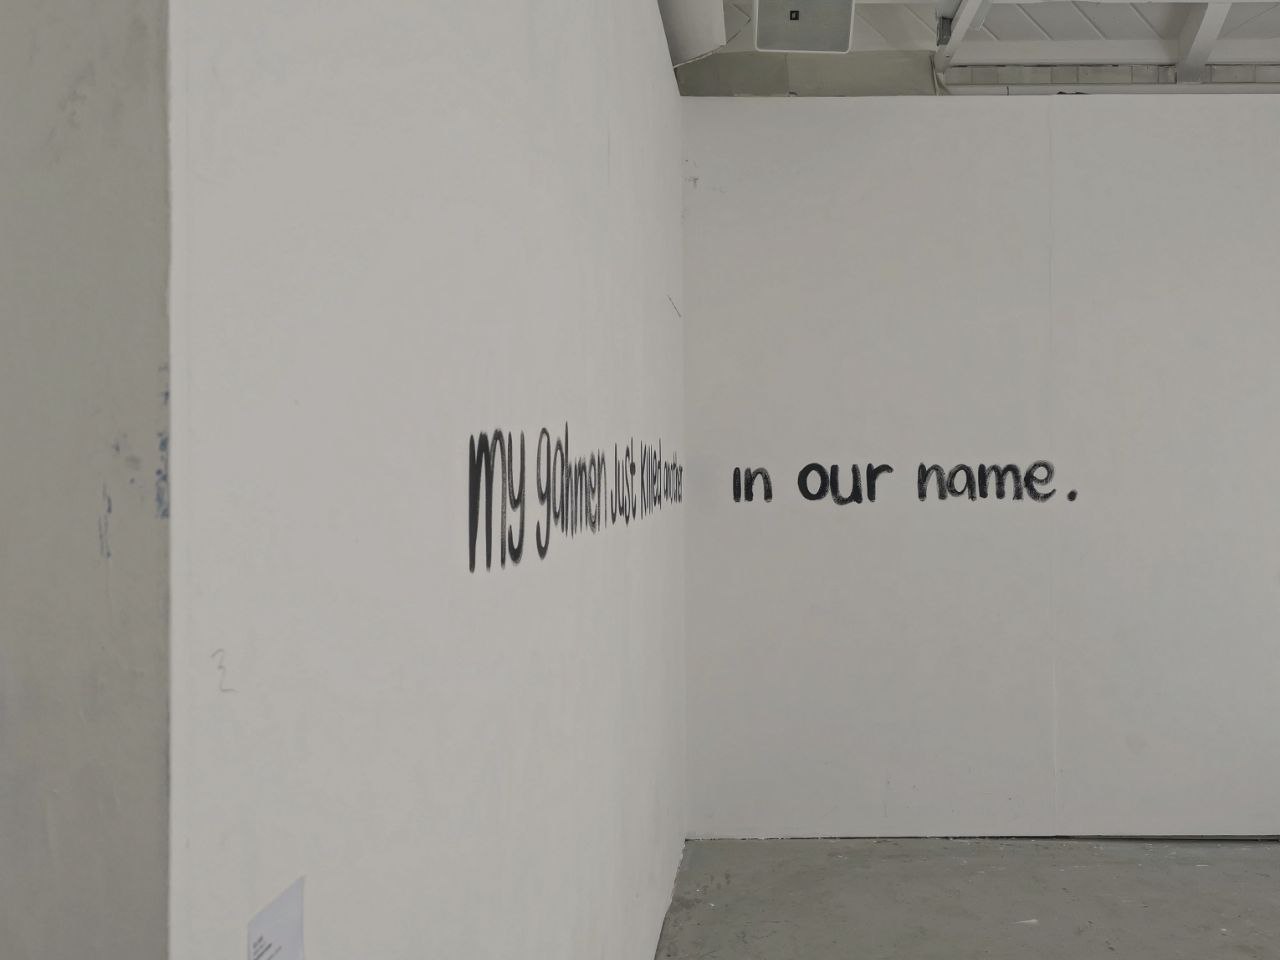 A photo of black writing on a white wall.